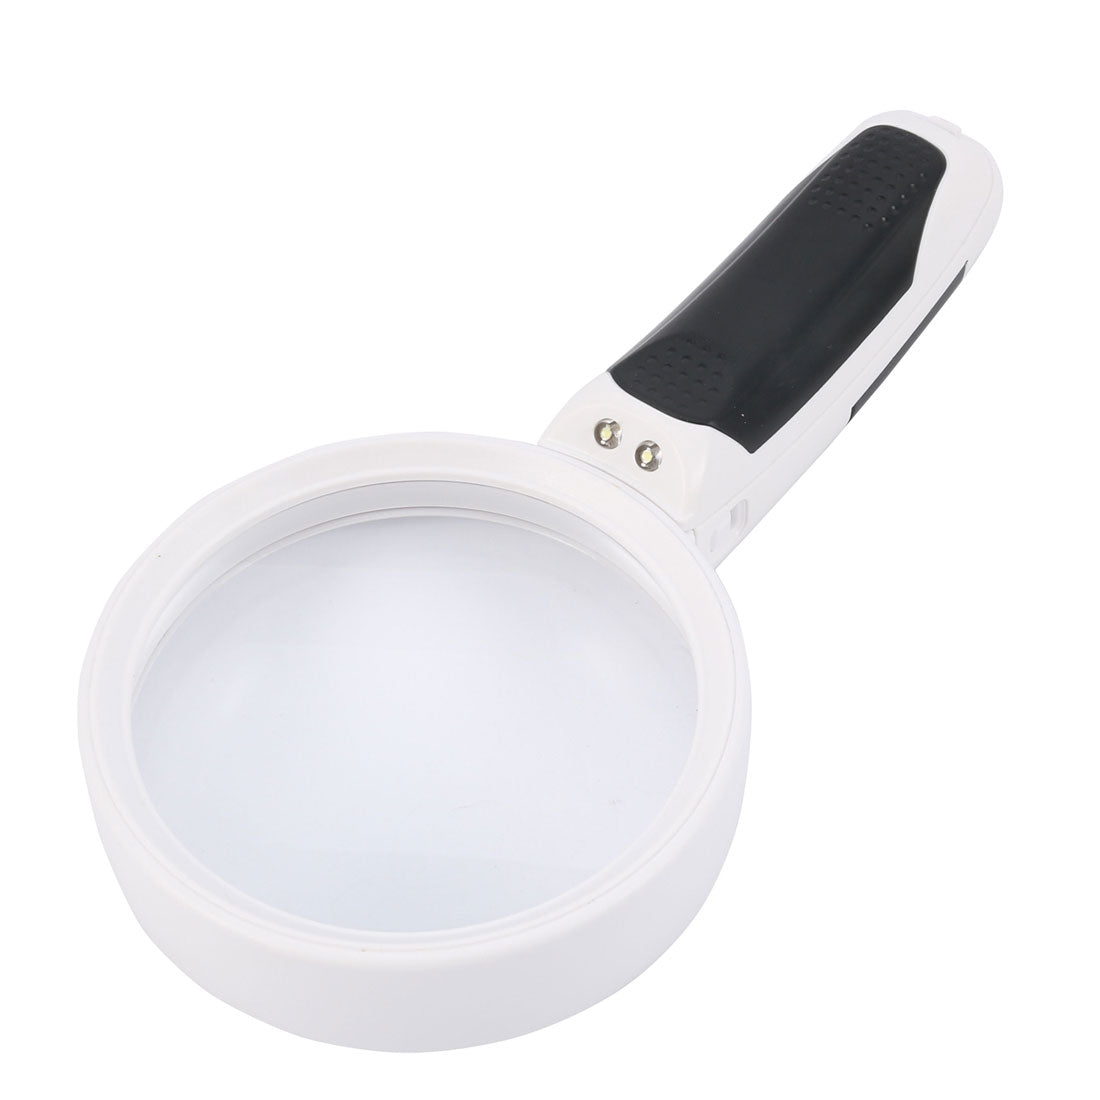 uxcell Uxcell Lighted Illuminated Magnifier Handheld Magnifying Glass 20X w LED Light